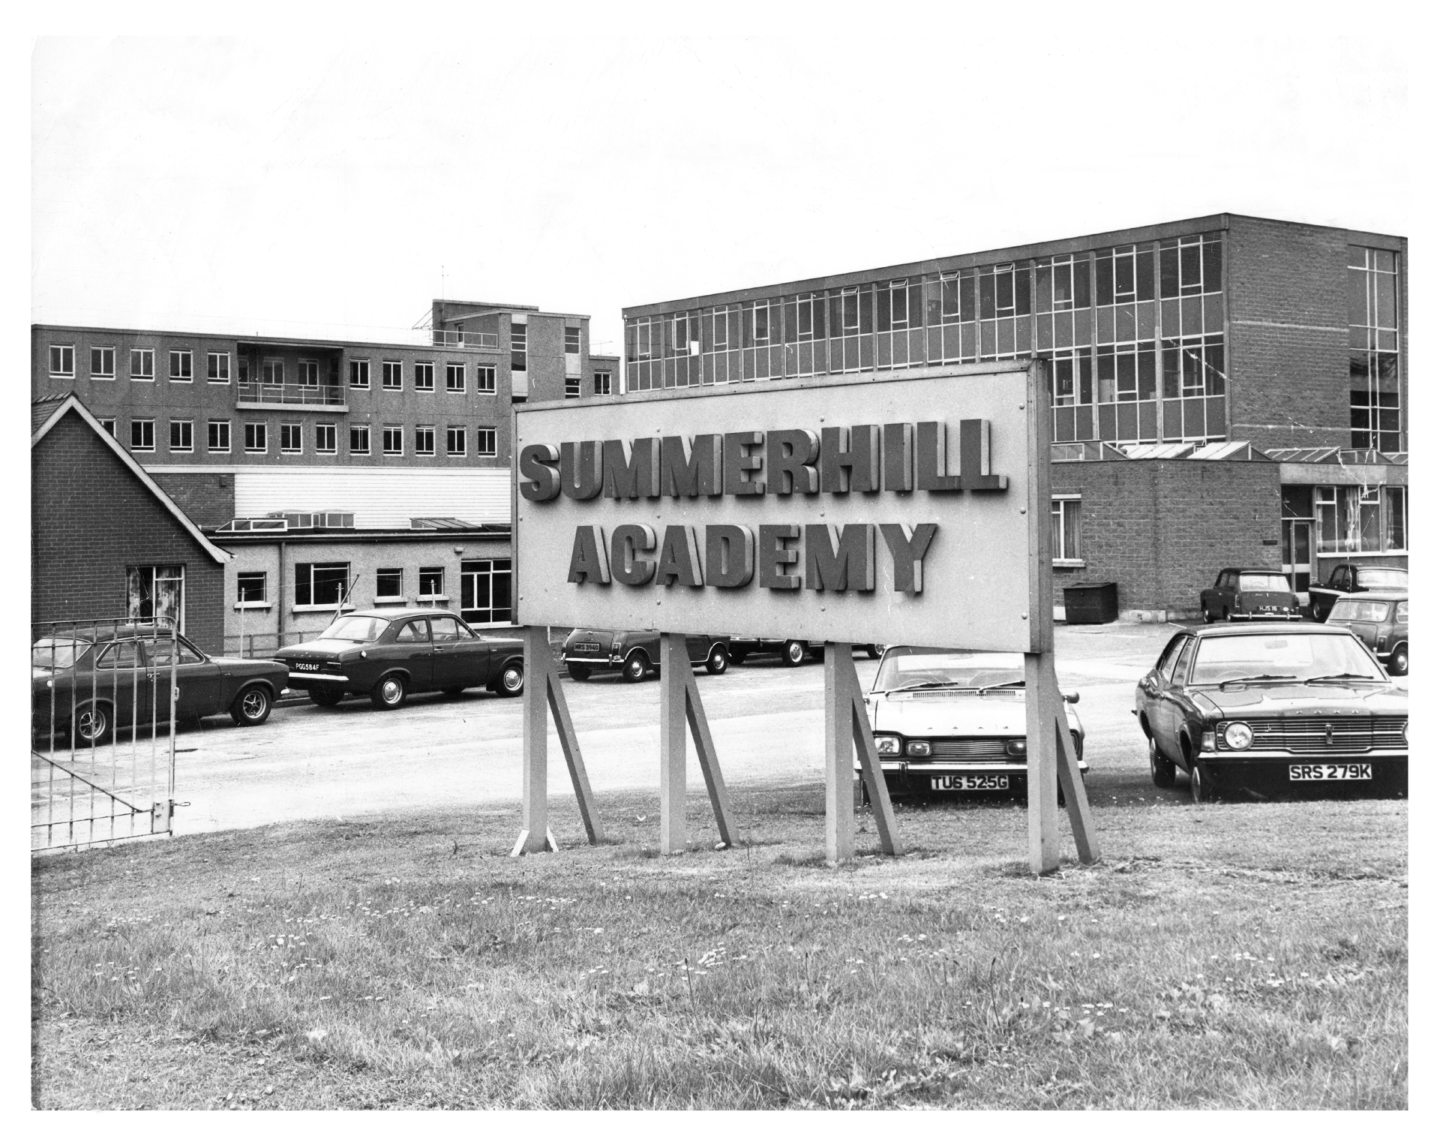 An exterior view of Summerhill Academy in 1982